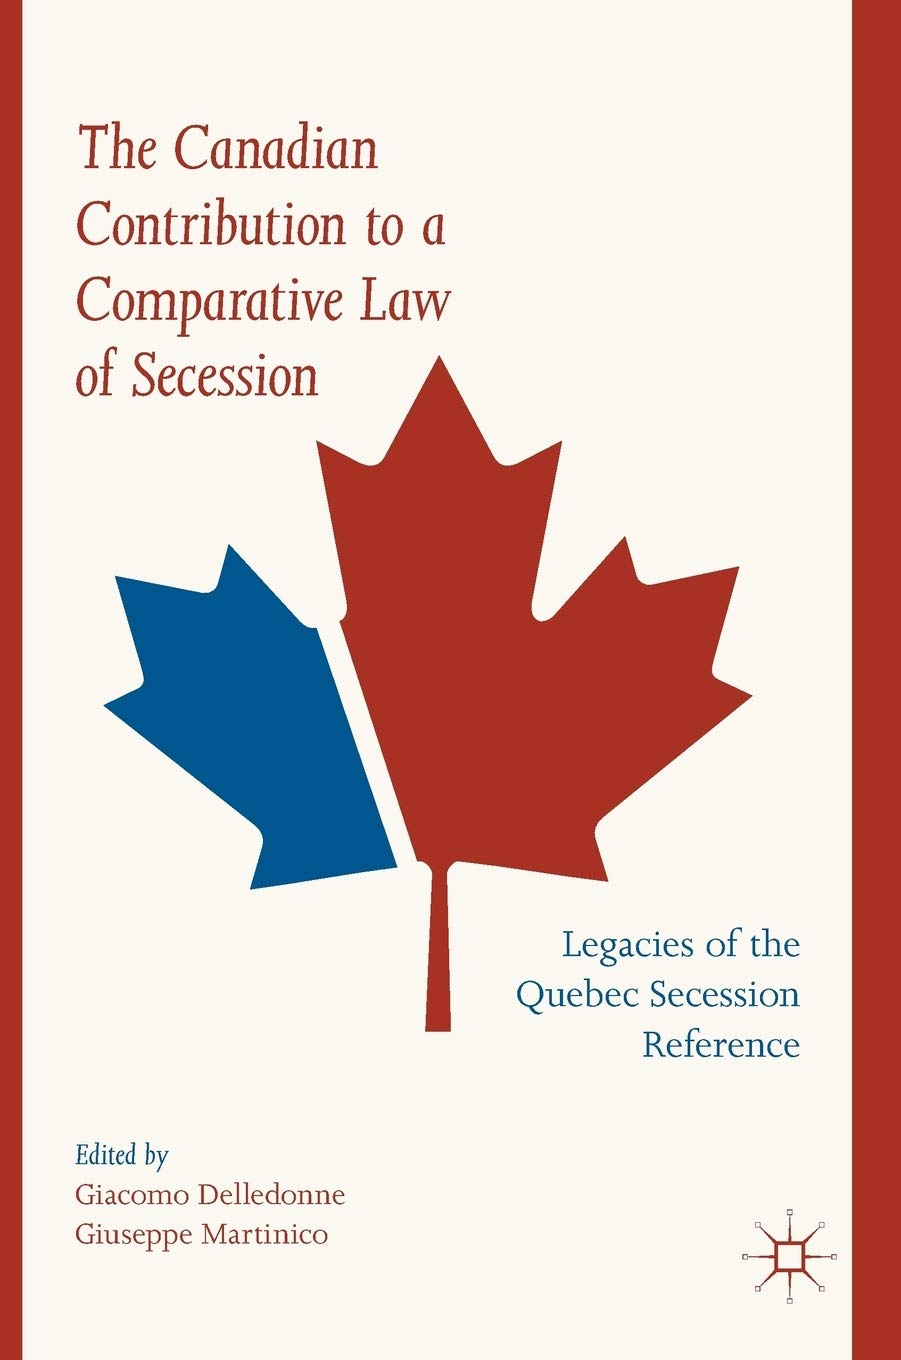  Legacies of the Quebec Secession Reference